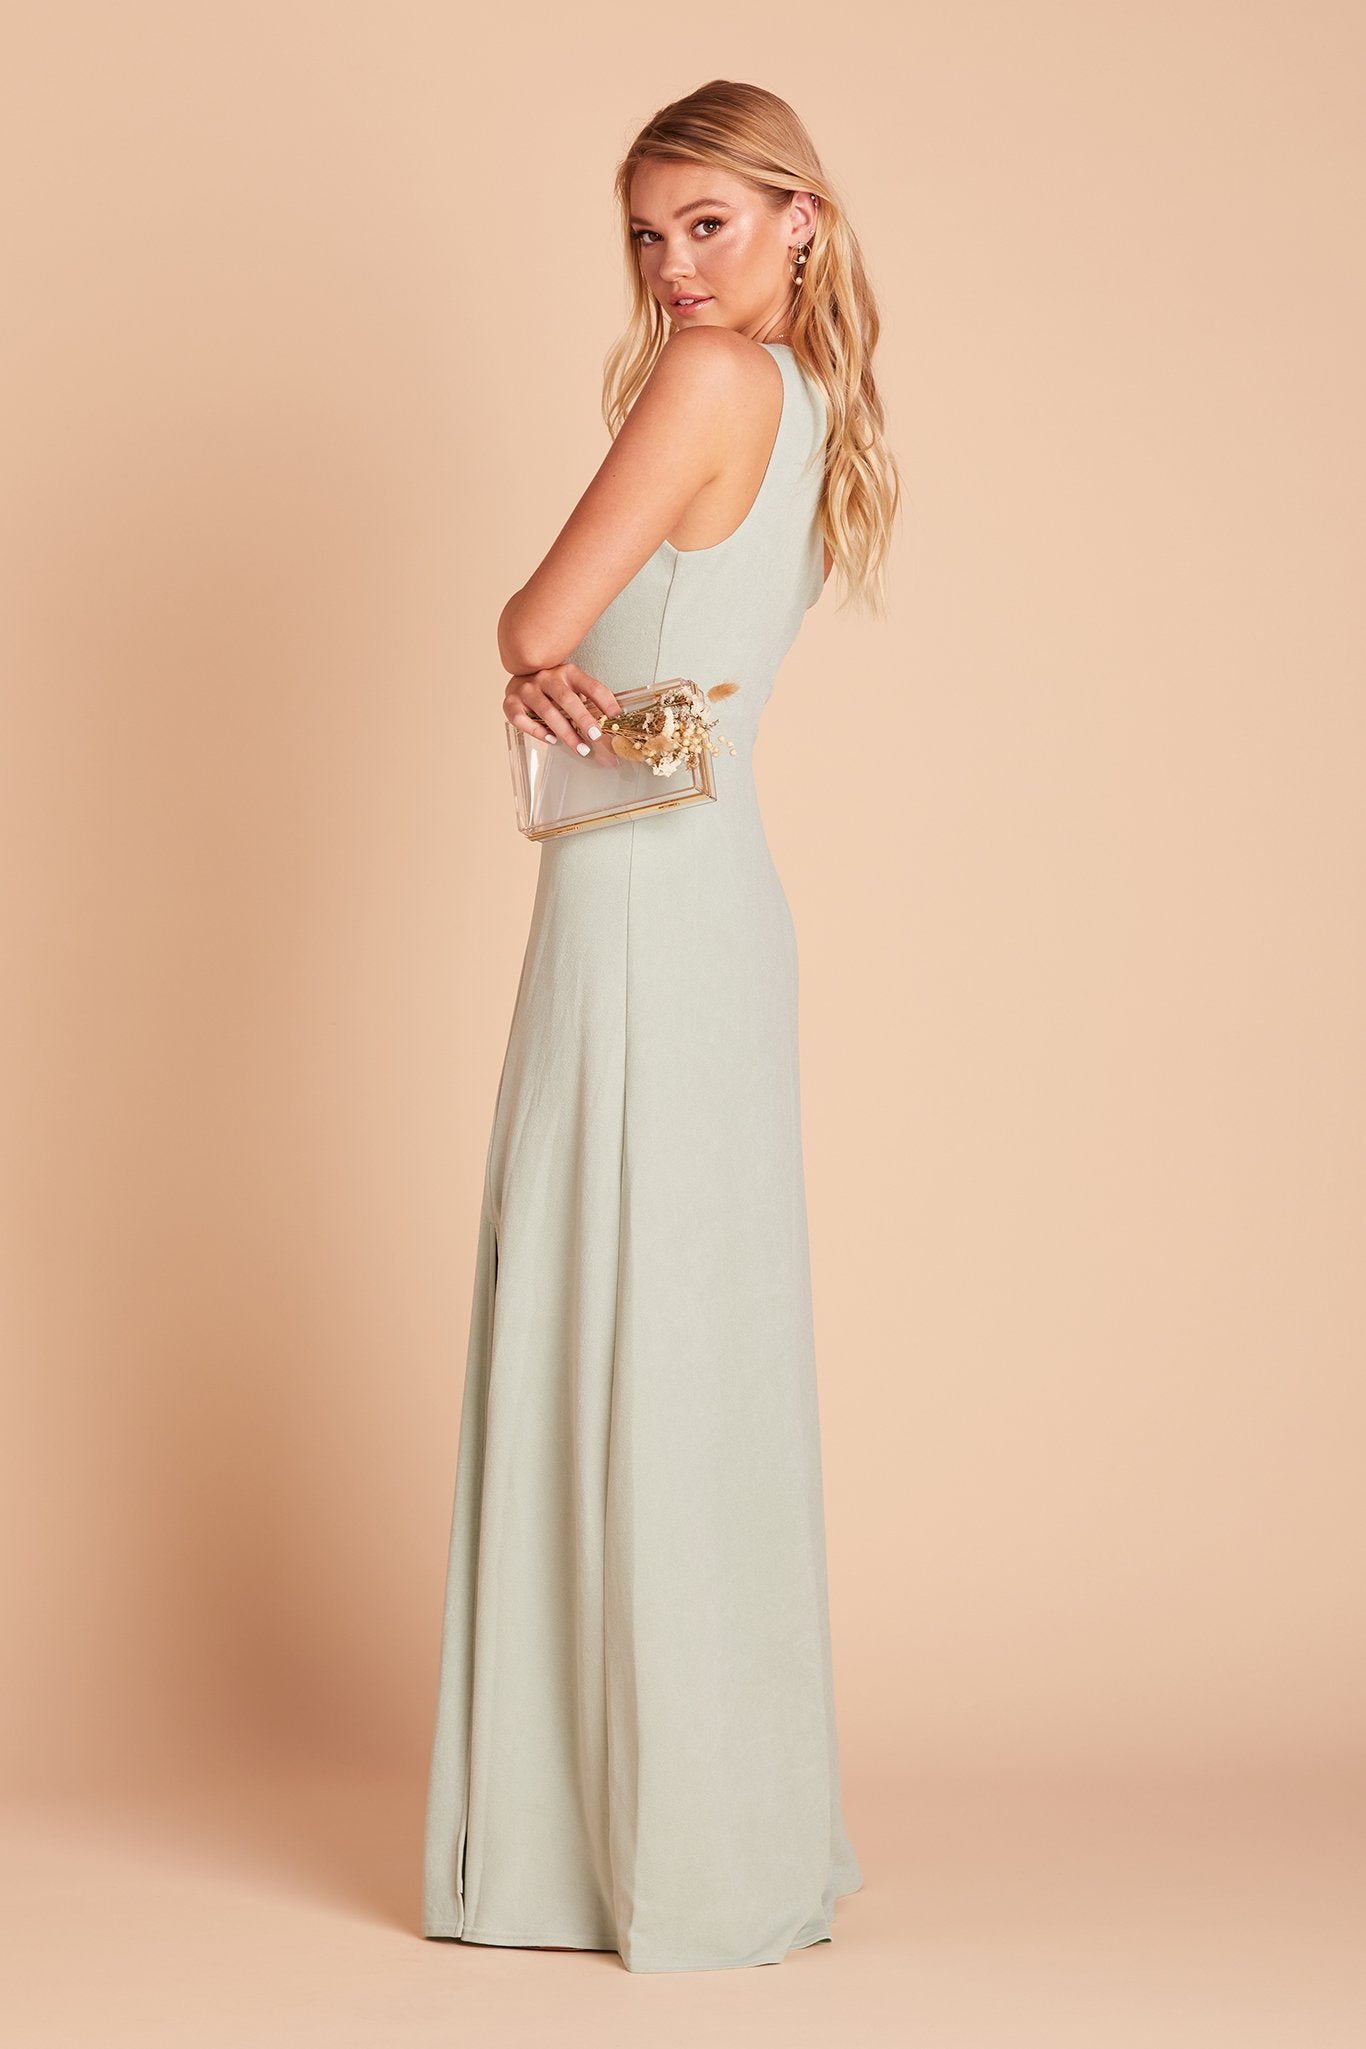 Kira bridesmaid dress in sage green crepe by Birdy Grey, side view